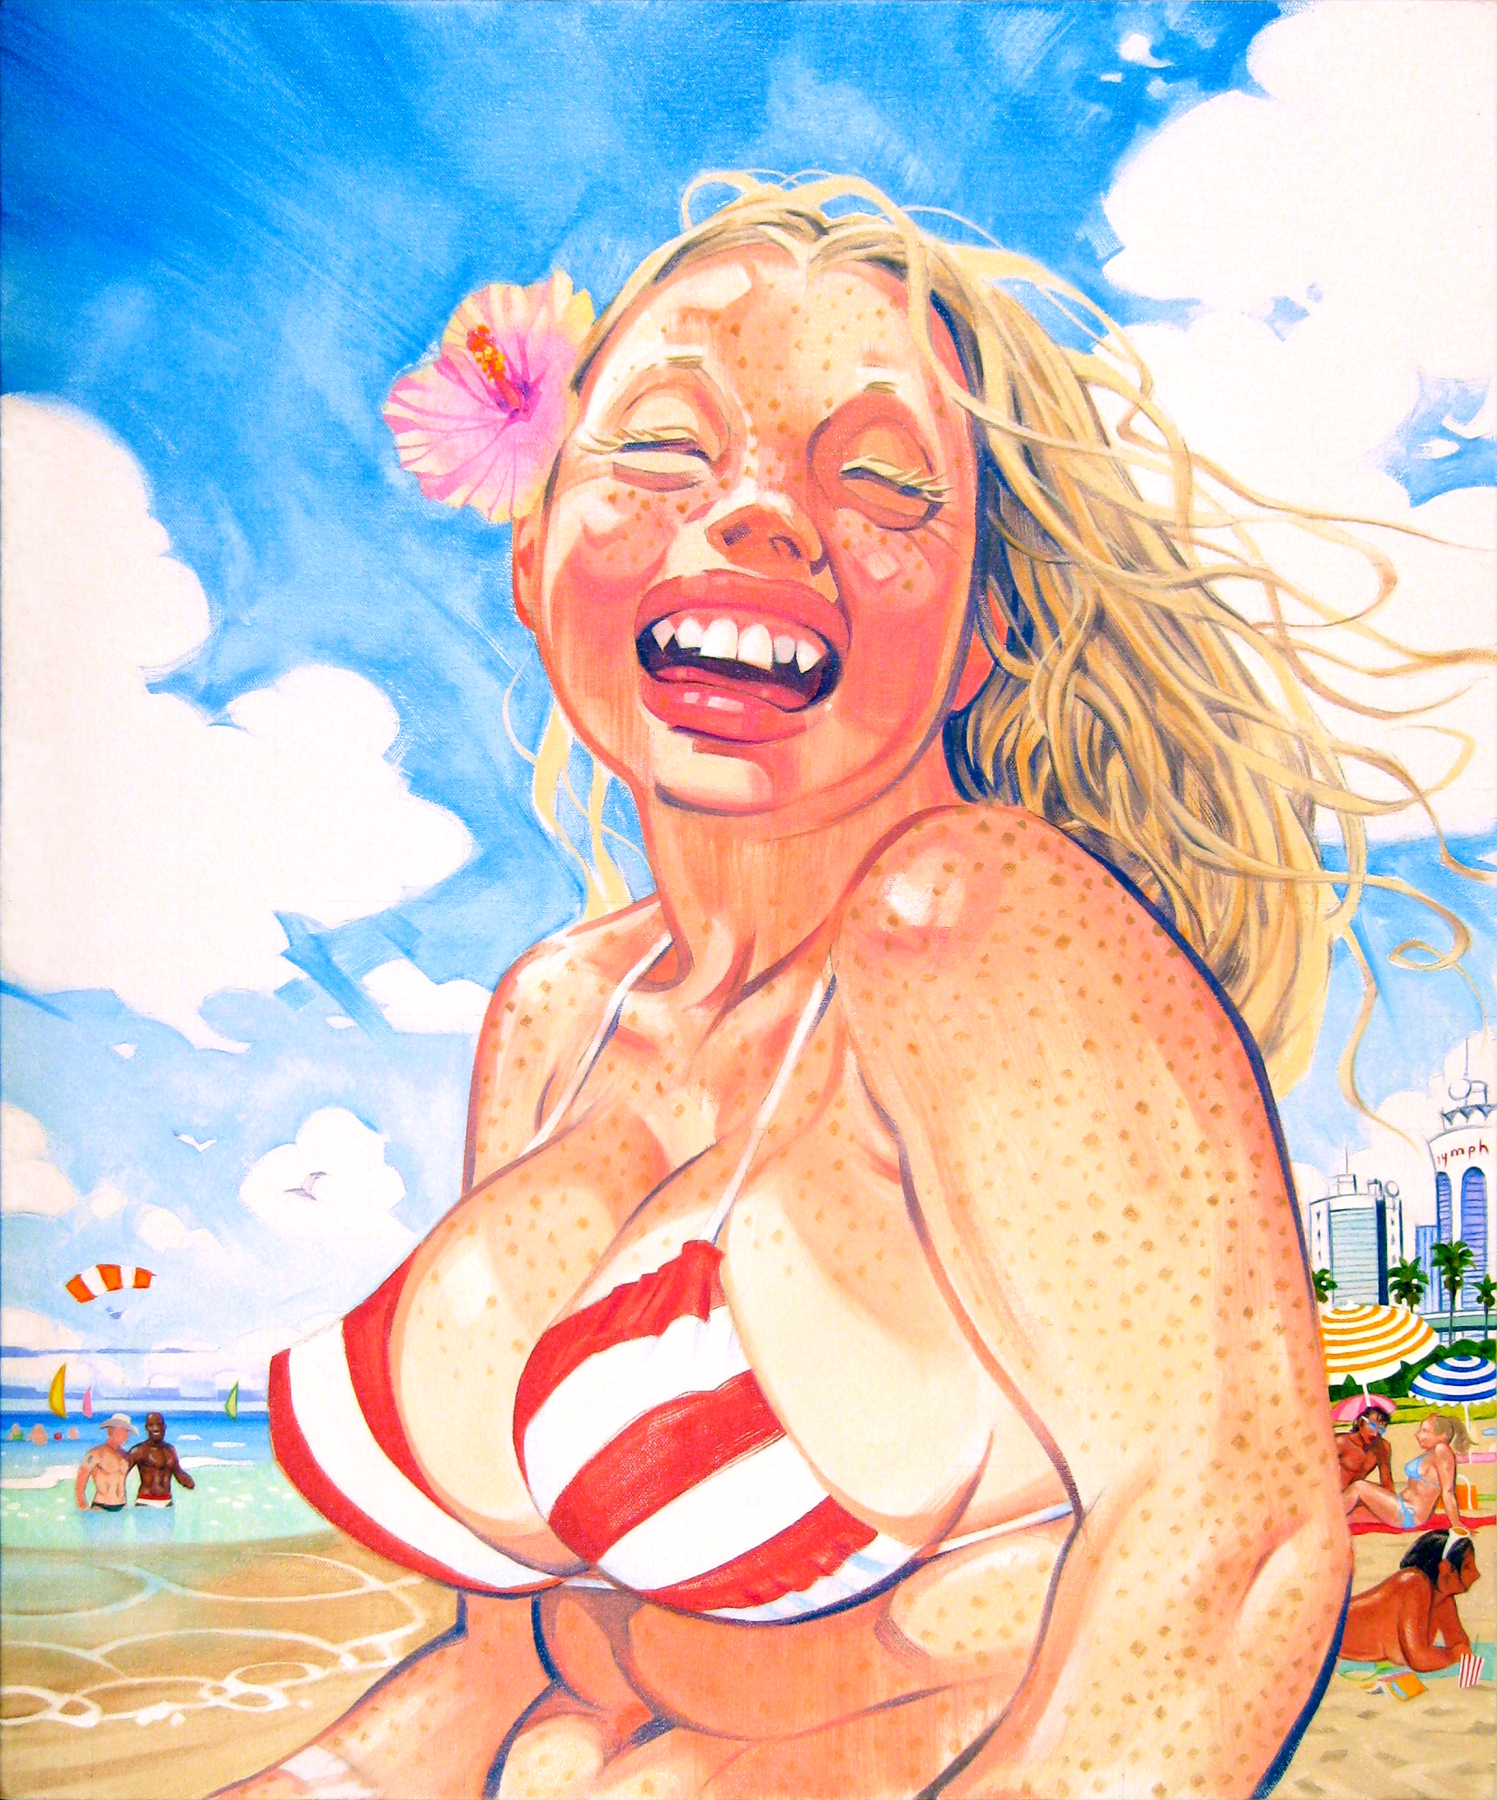 She Smells Like a Coconut, 2009,  courtesy of Greg Jacob, oil on canvas, 24.75 x 21.25 inches, by Taiyo la Paix